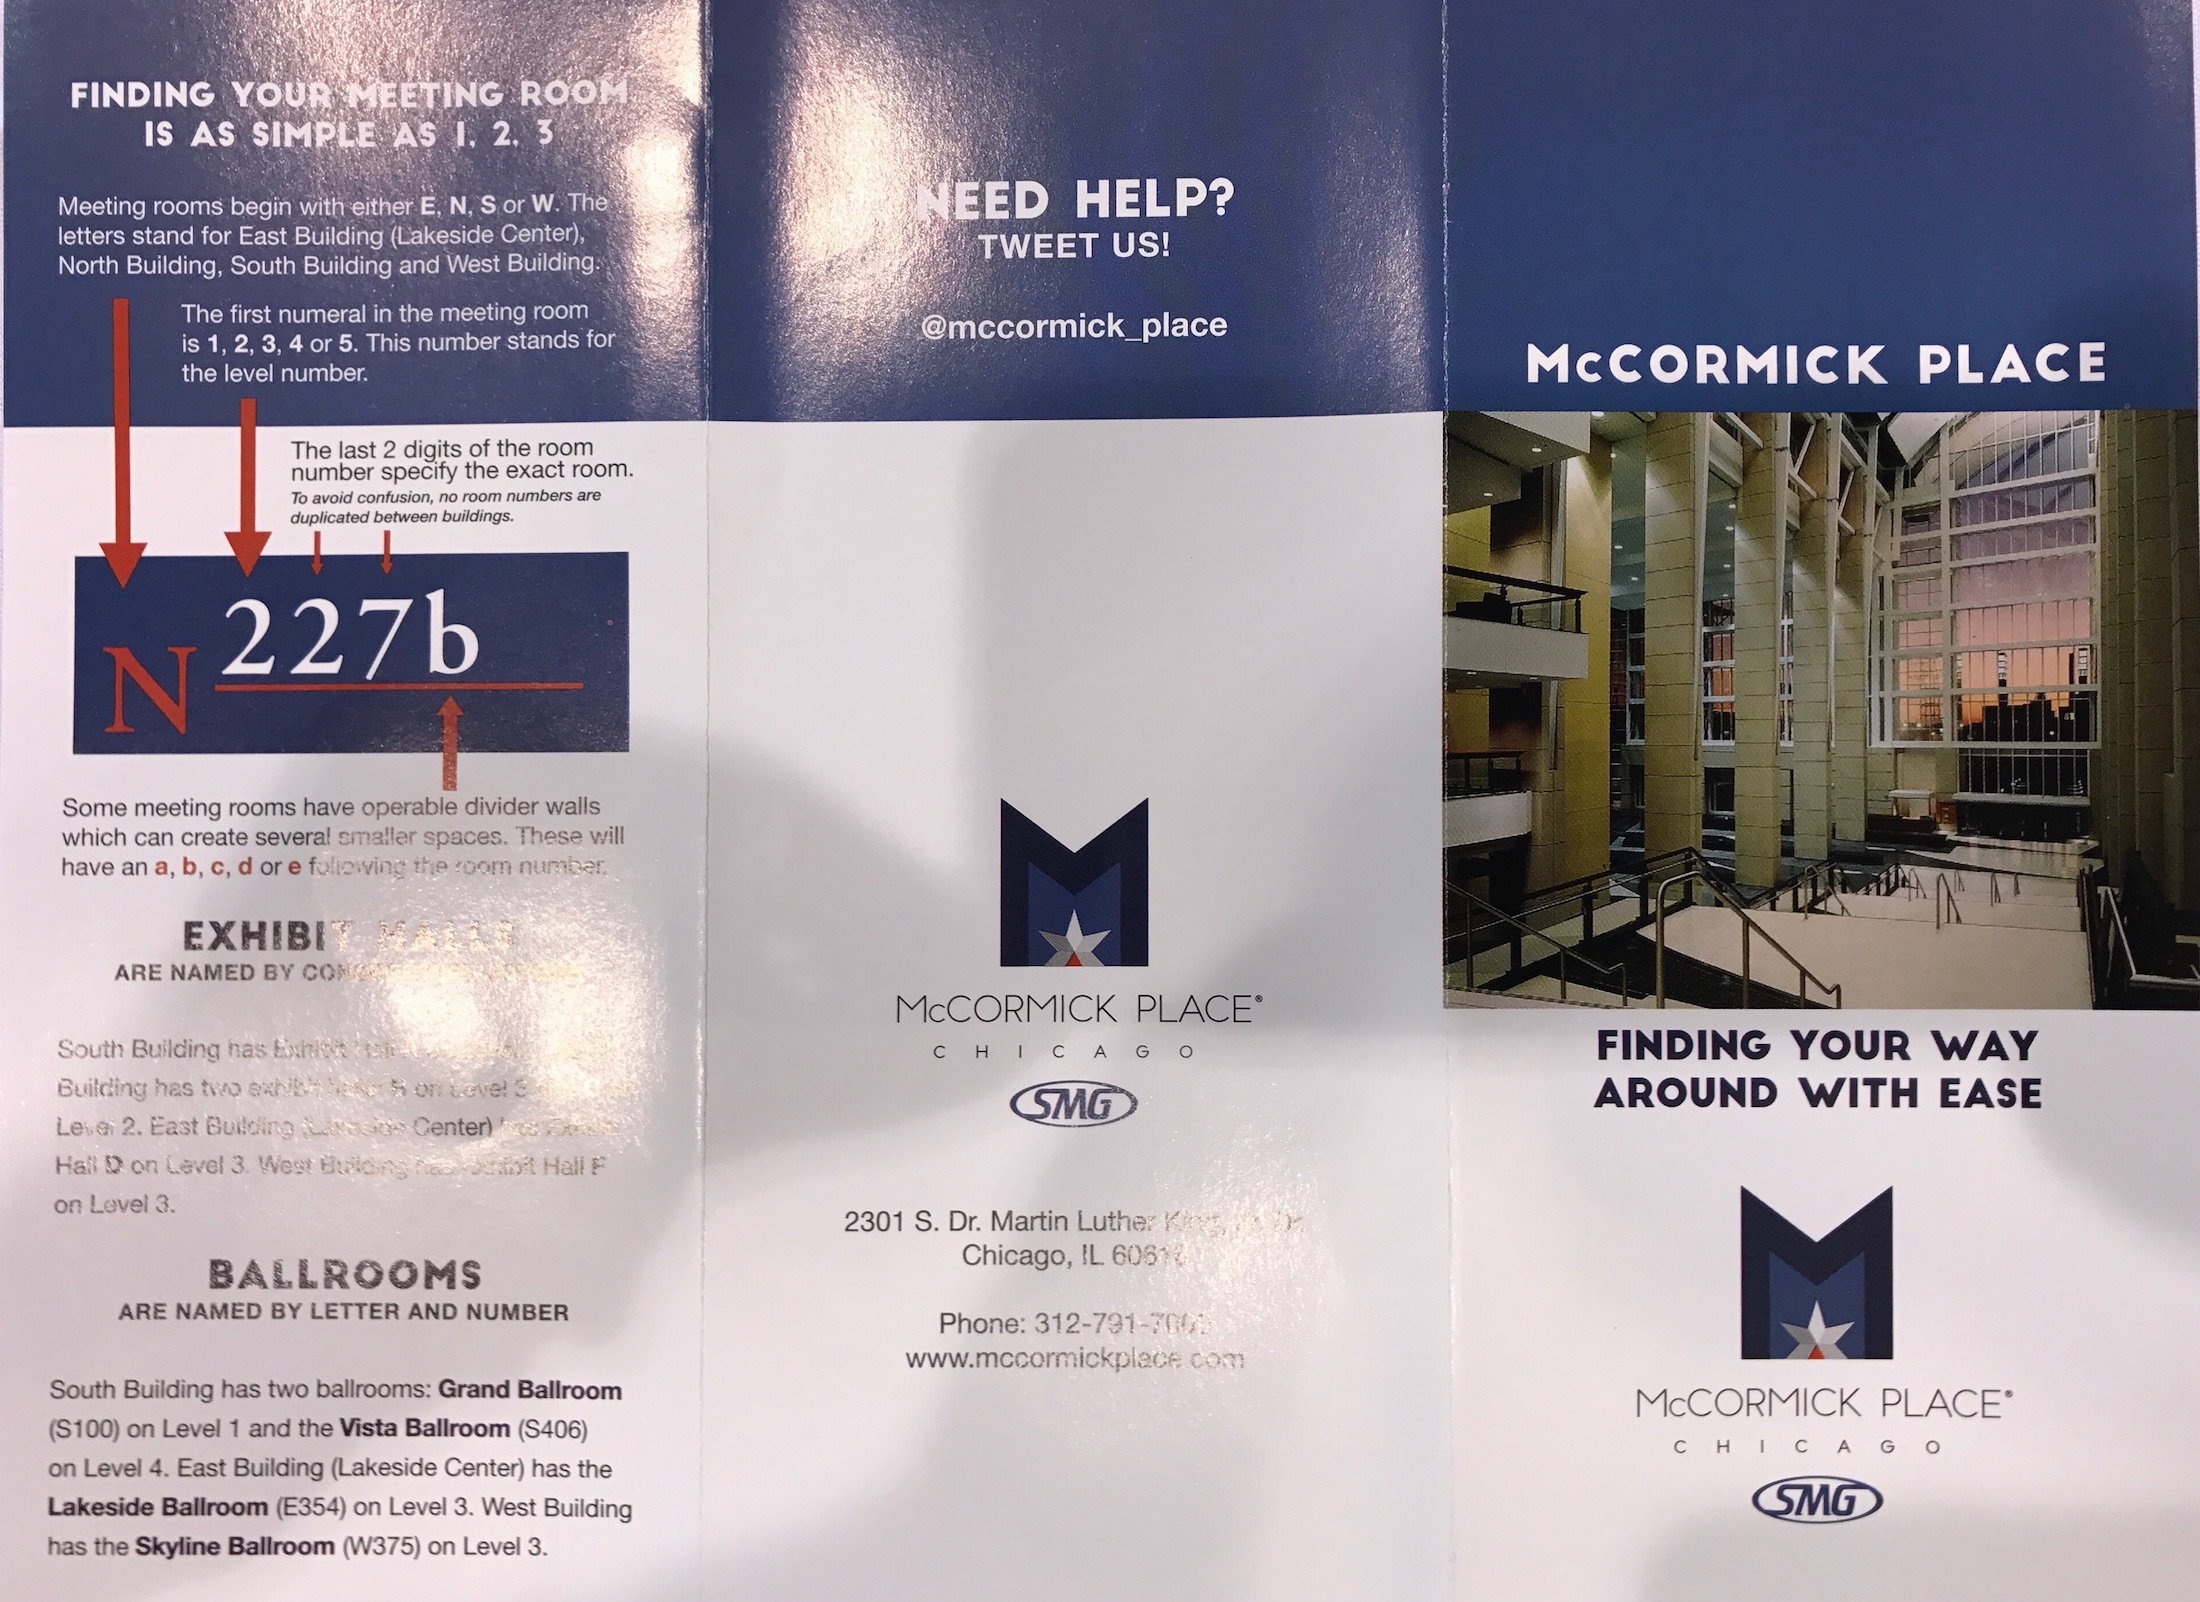 mccormick place chicago pamphlet